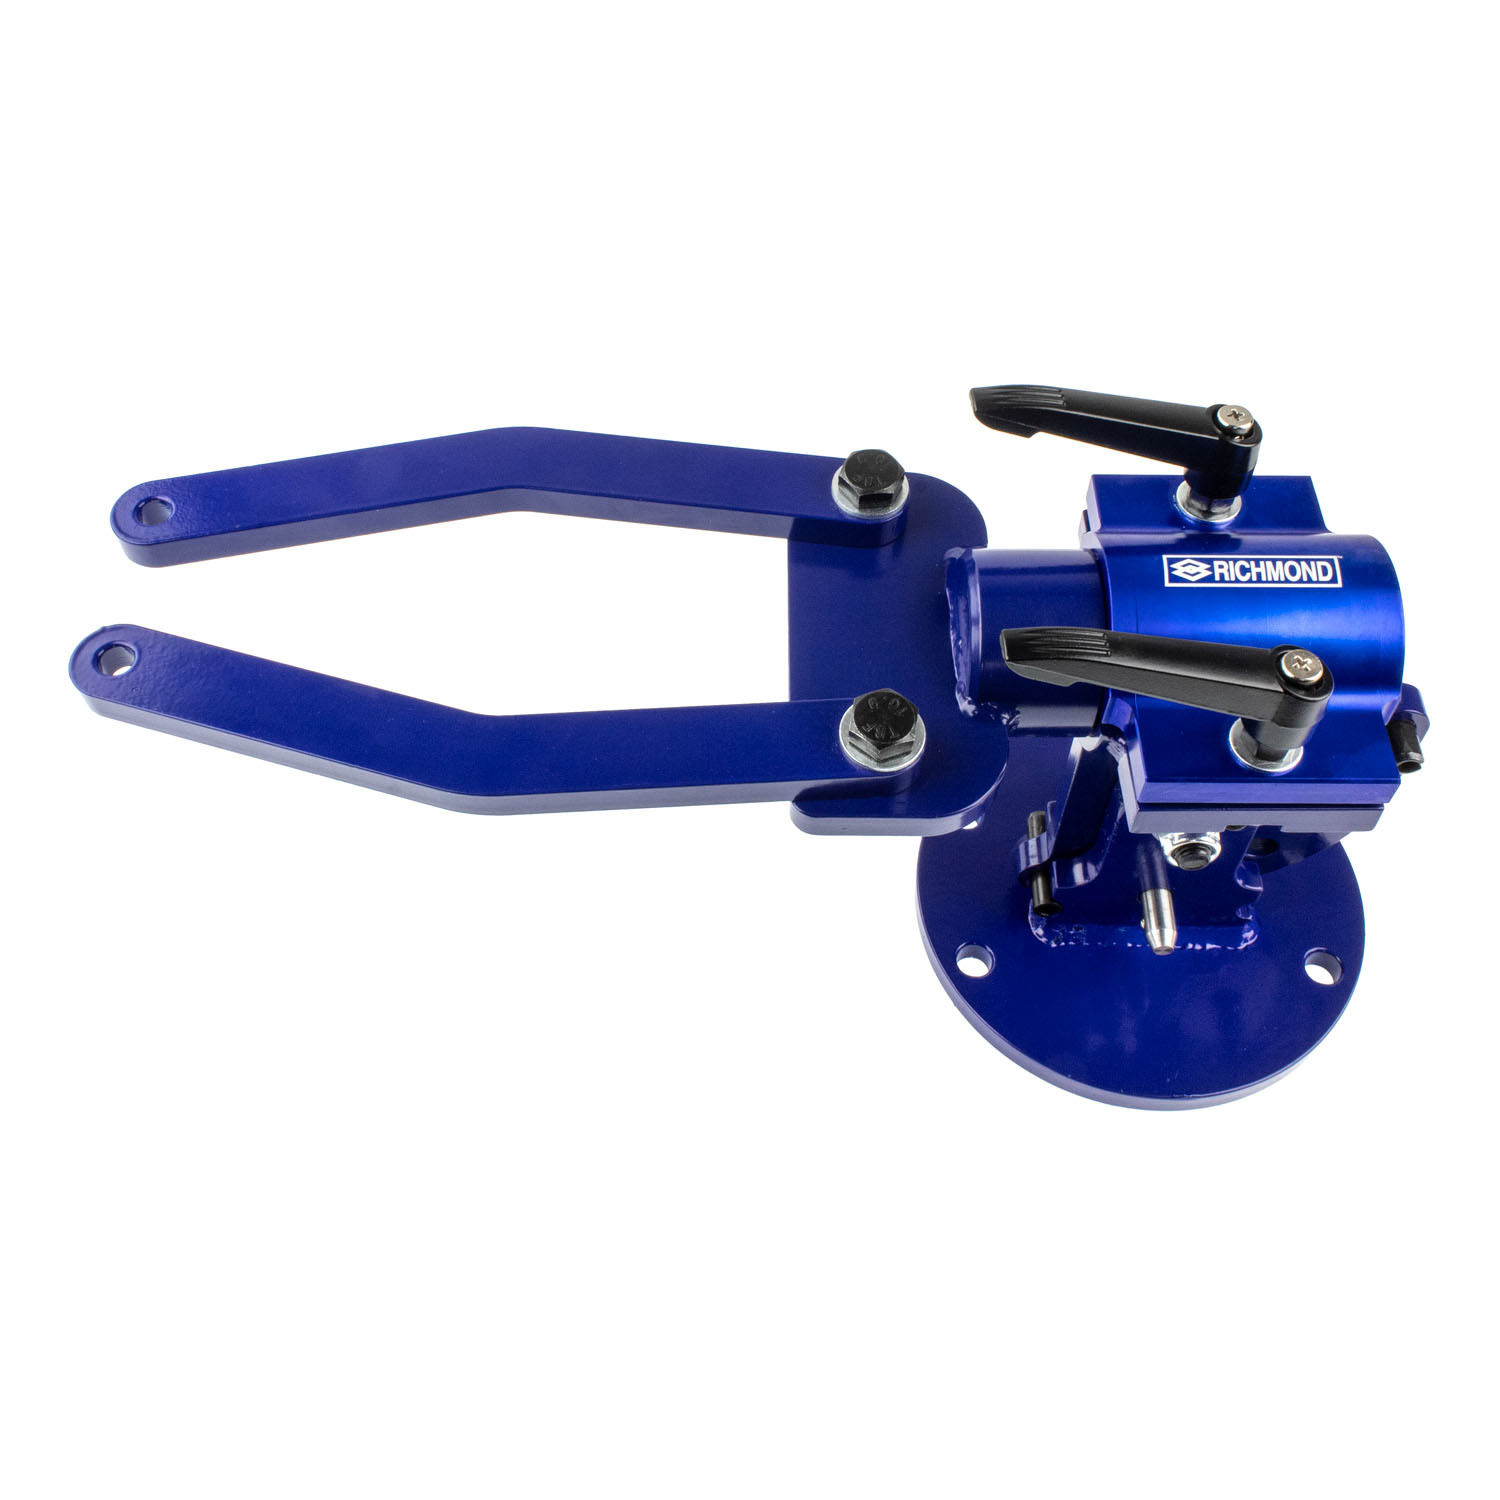 Richmond Gear 90-0020-1 Differential Housing Bench Tool, Adjustable, Fits Transmissions, Aluminum, Blue Anodized, Each